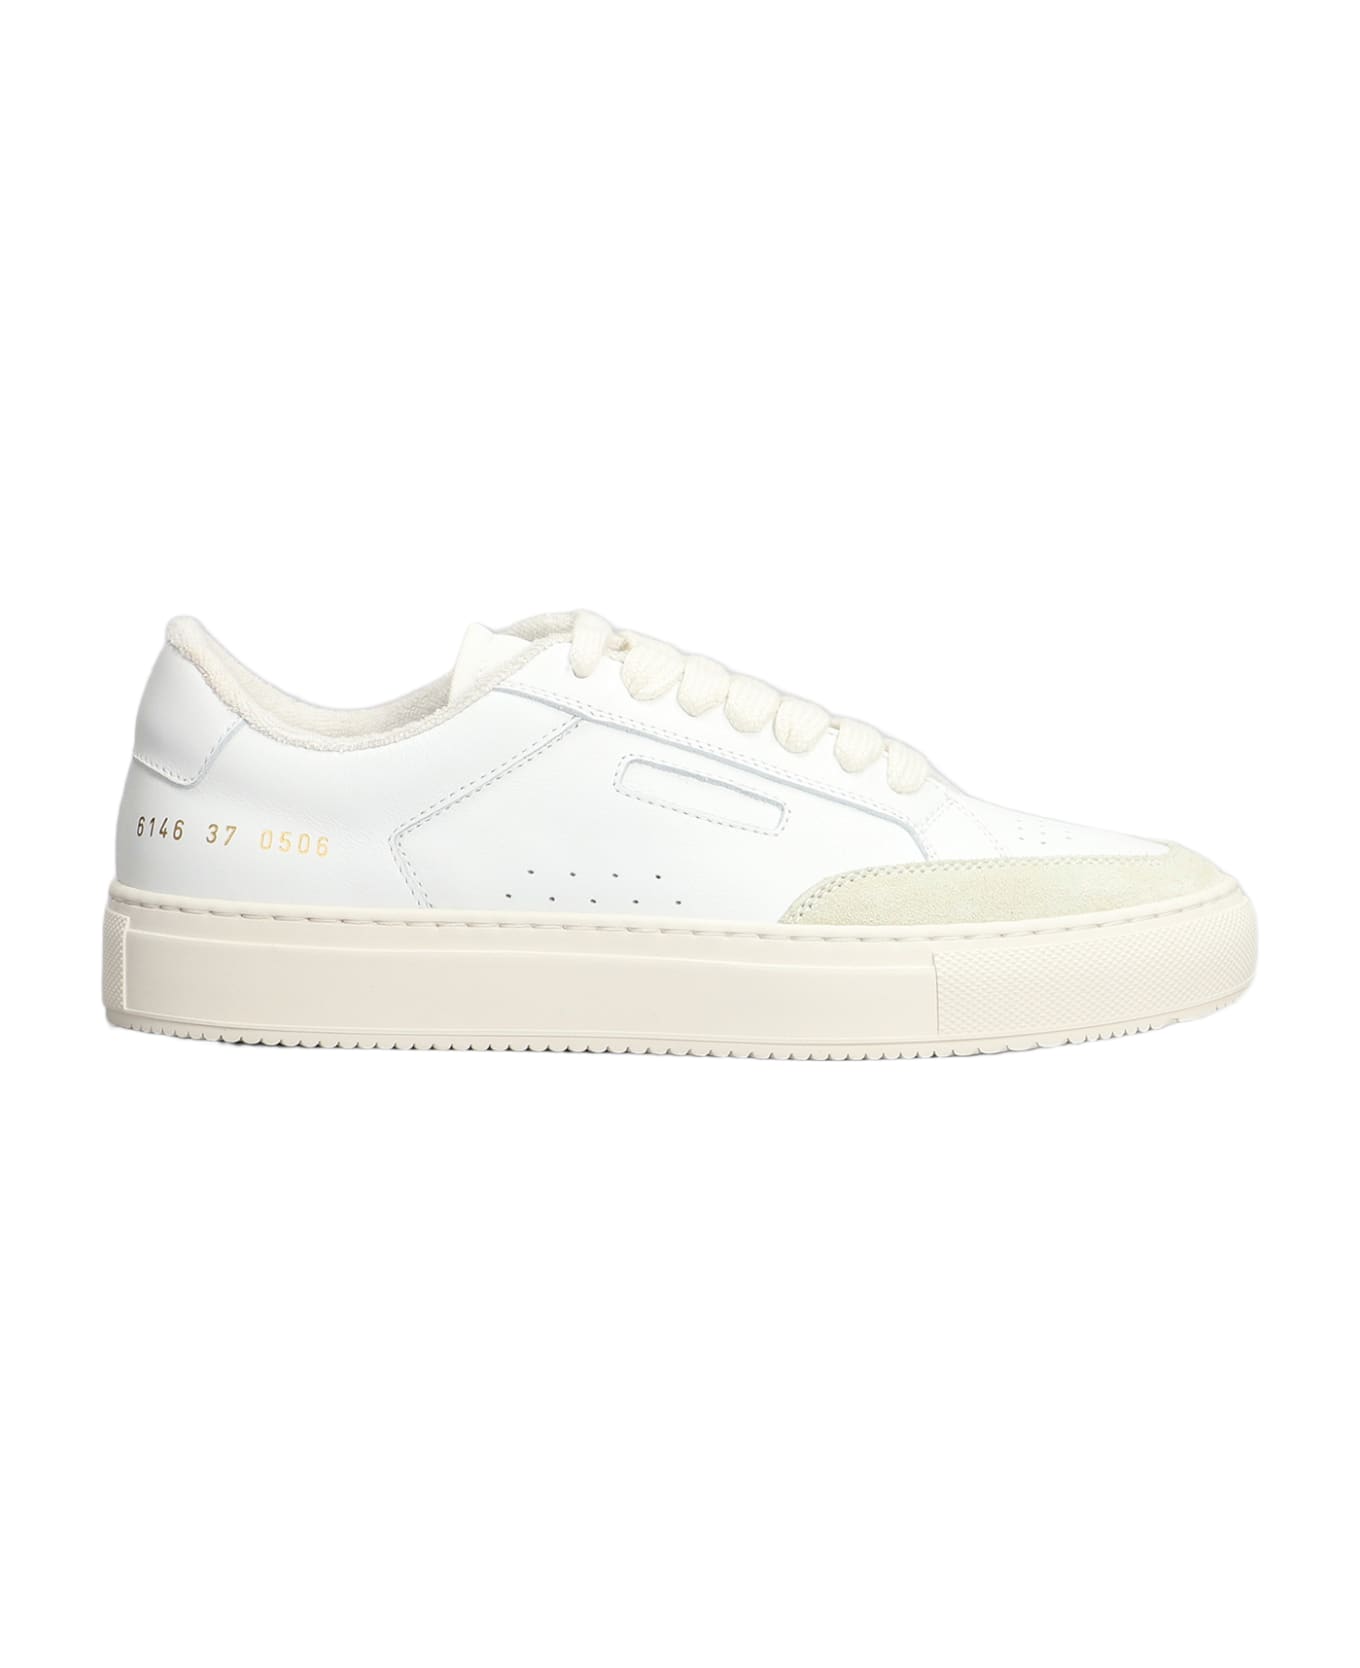 Common Projects Tennis Pro Sneakers - white ウェッジシューズ